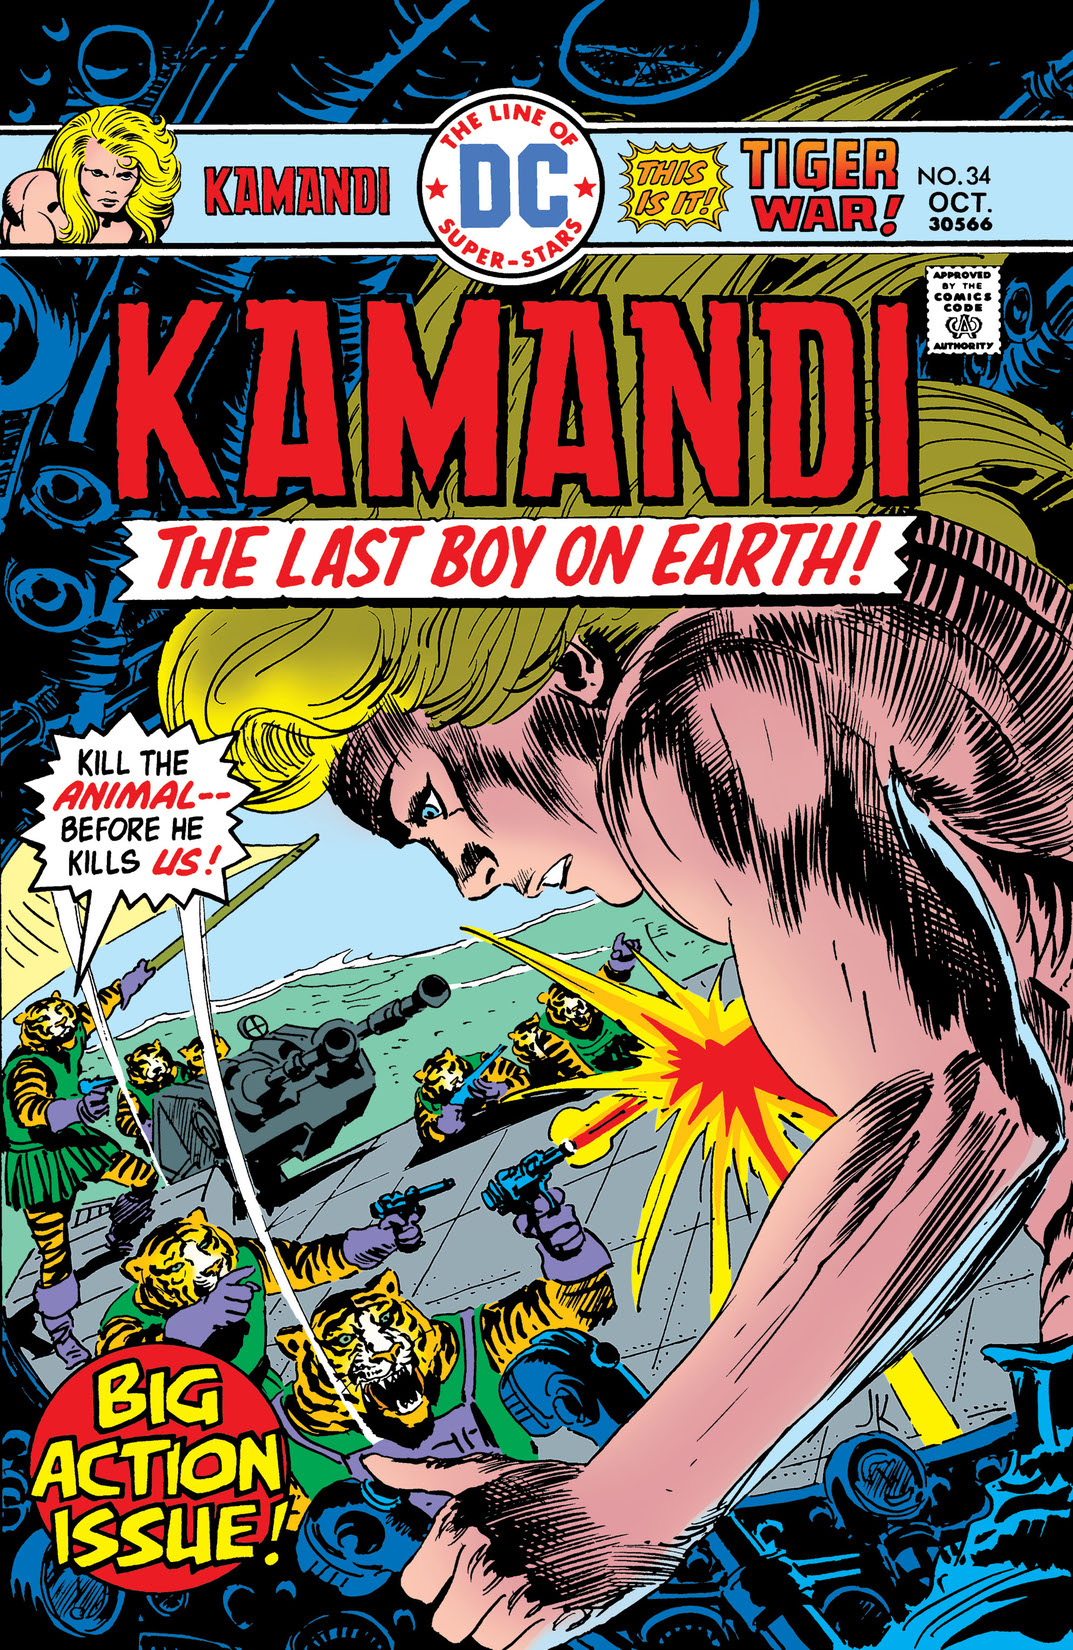 Kamandi: The Last Boy on Earth #34 preview images